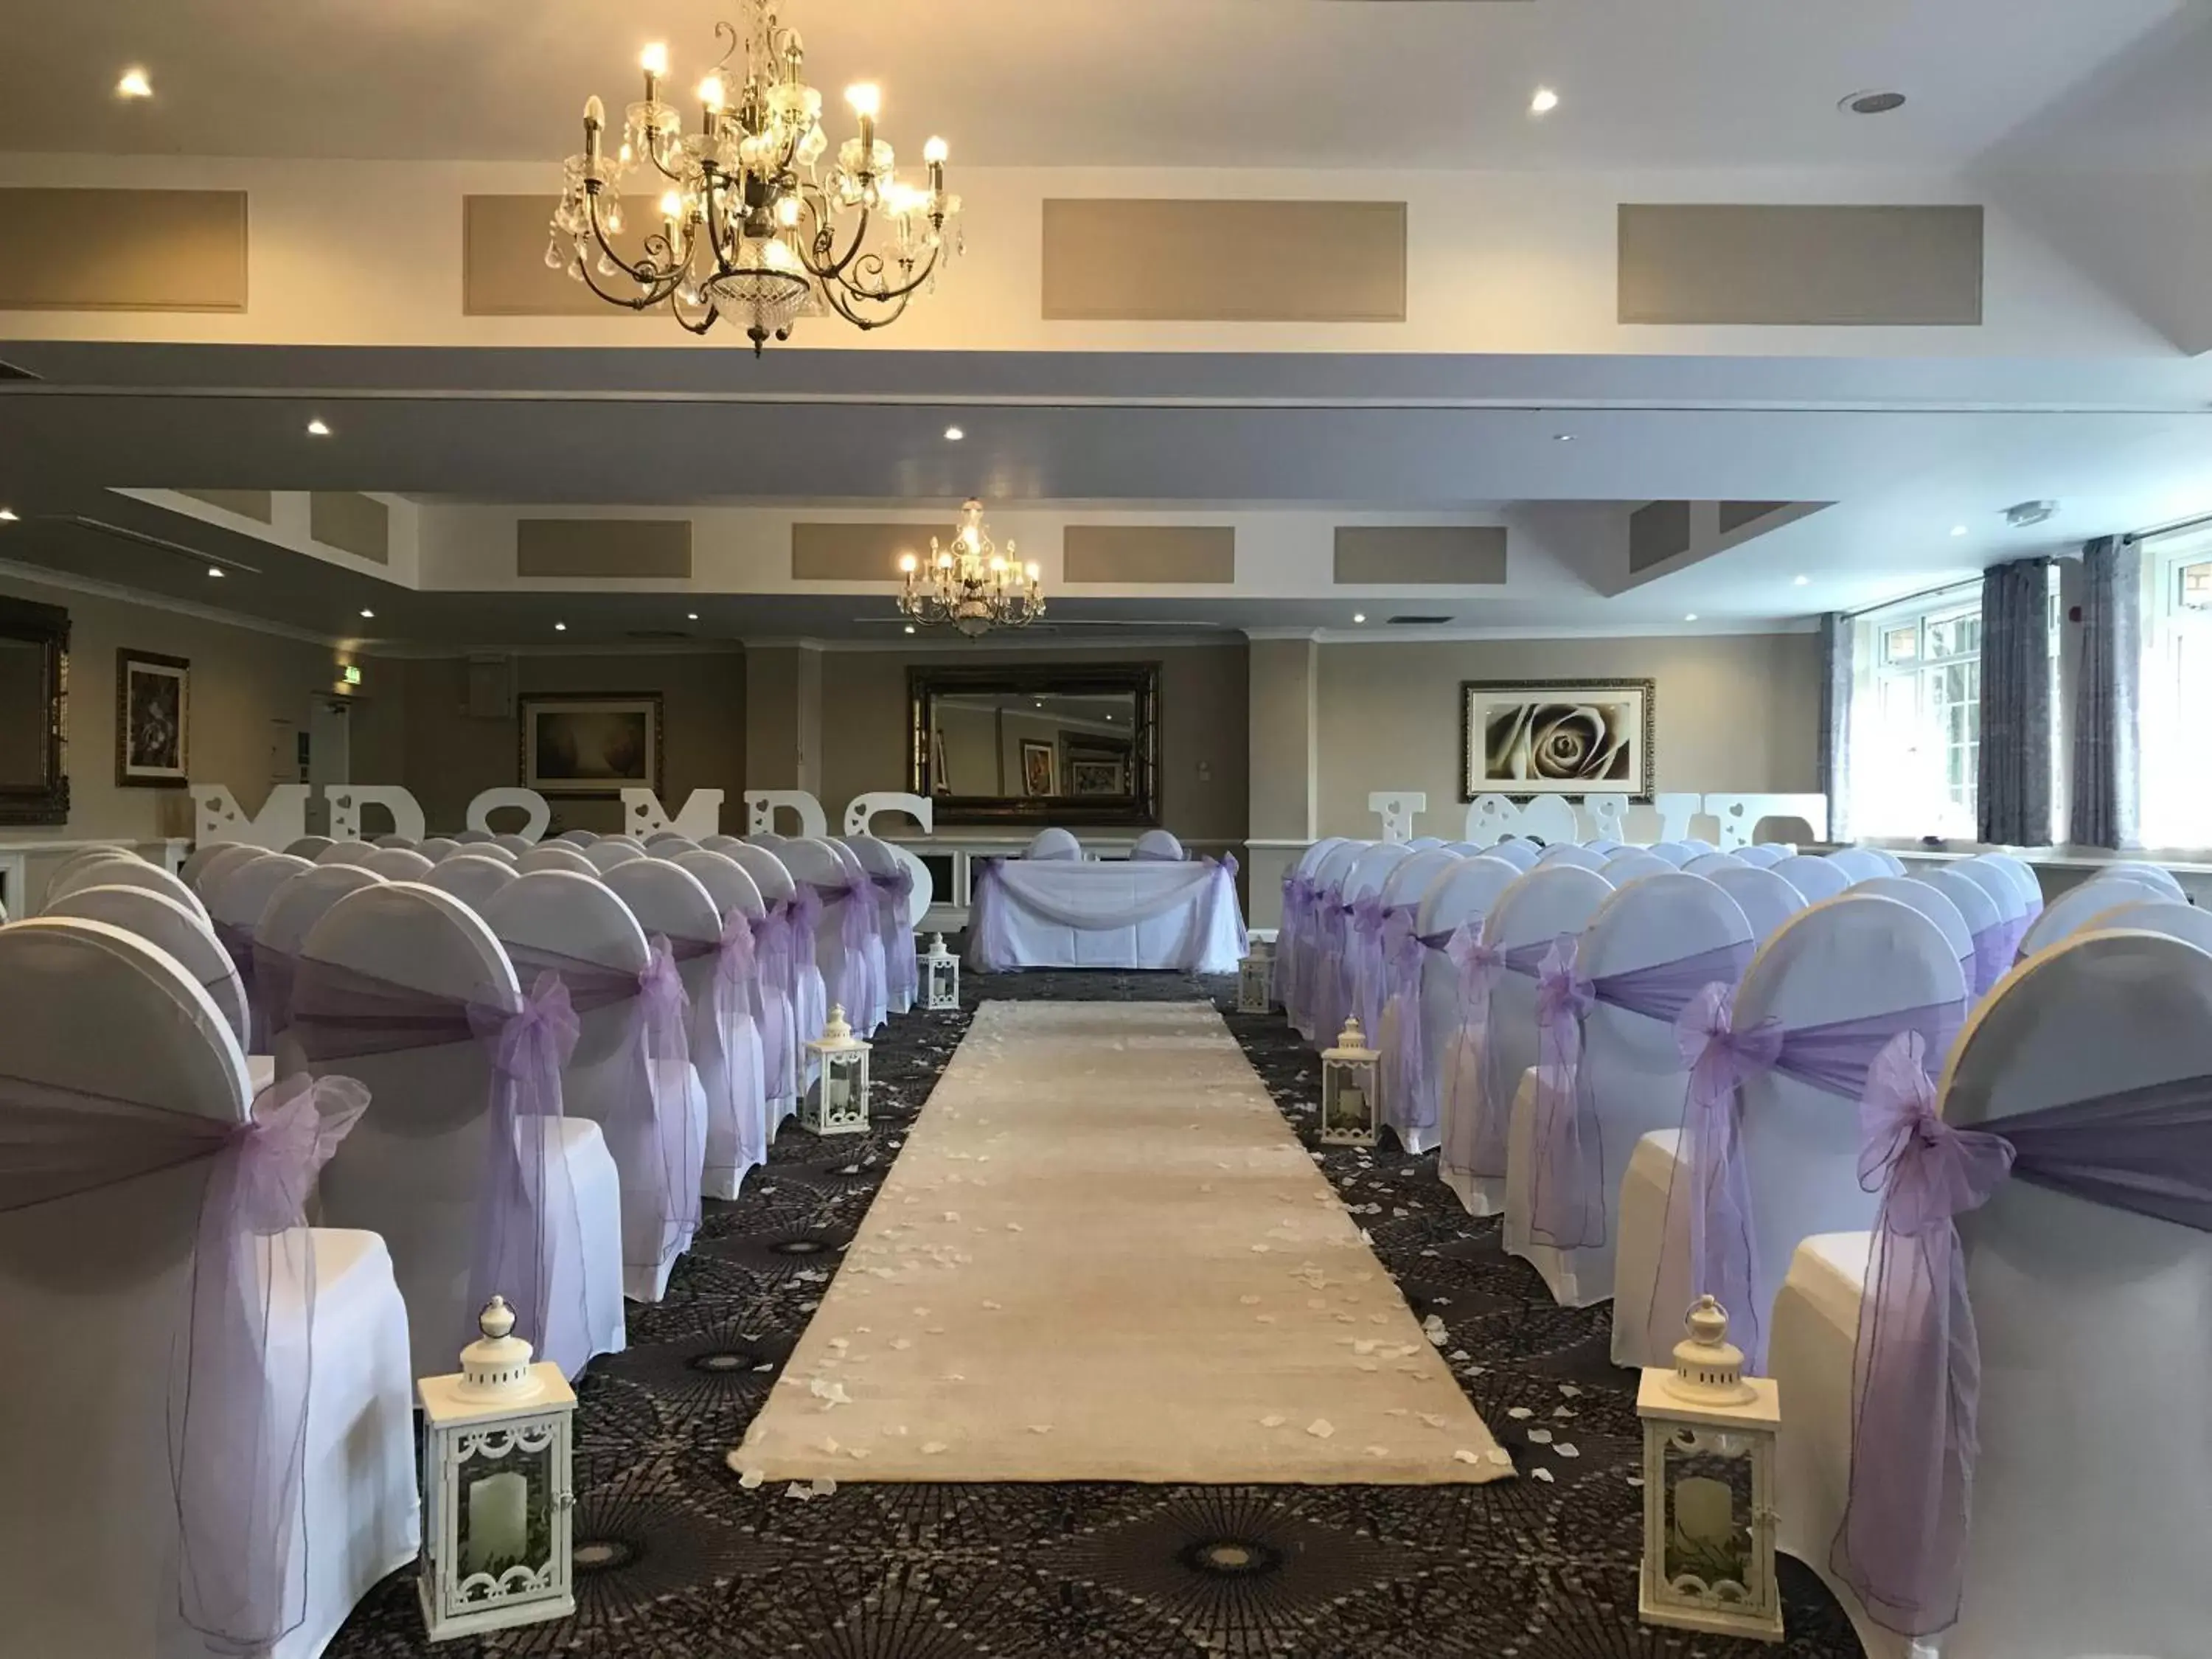 Area and facilities, Banquet Facilities in Stone House Hotel ‘A Bespoke Hotel’